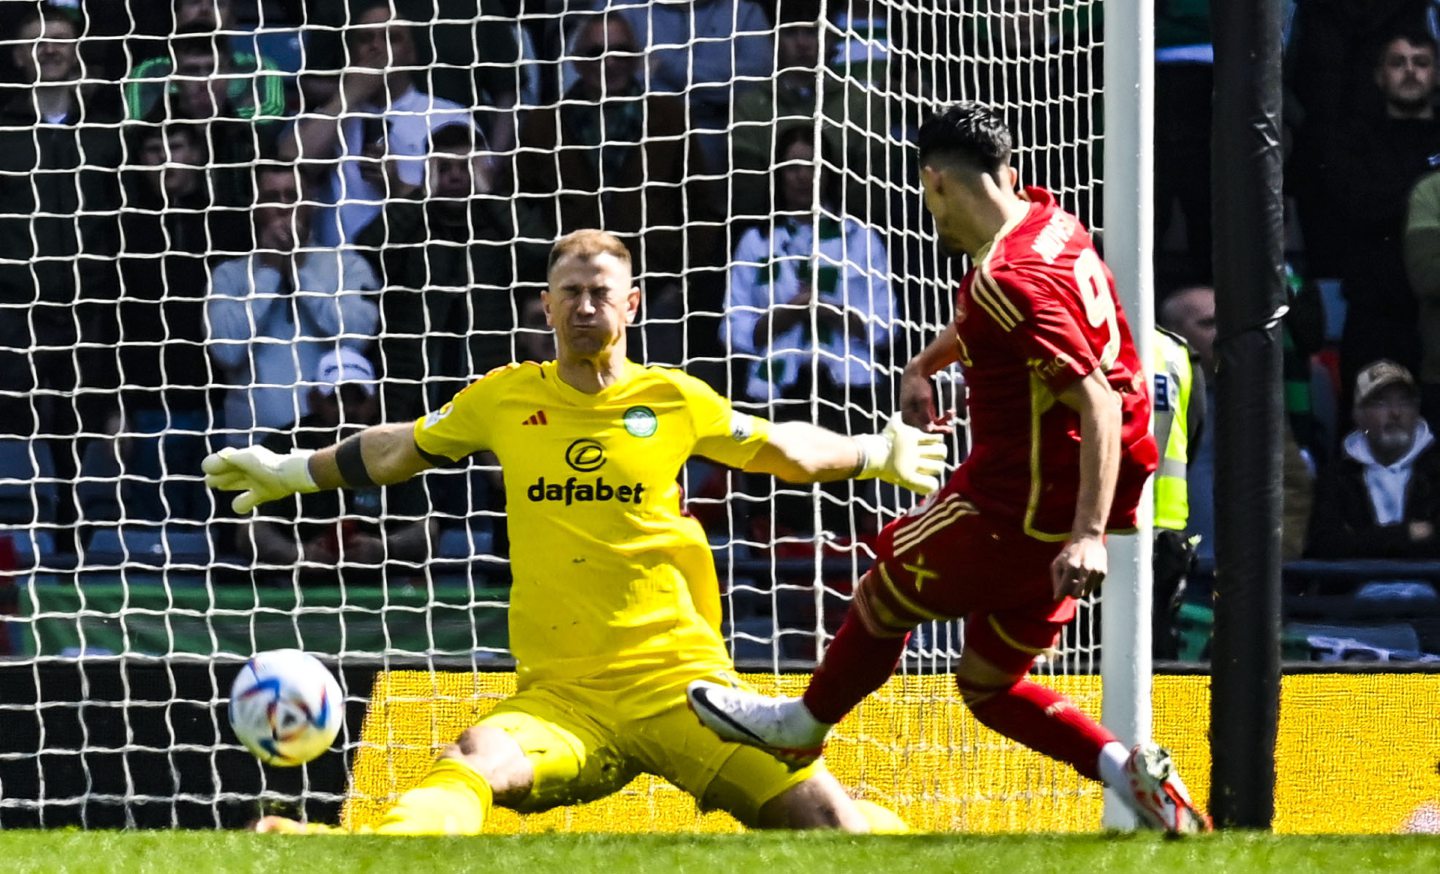 Aberdeen's Bojan Miovski scores to make it 1-0 against Celtic in the Scottish Cup semi-final. Image; SNS 